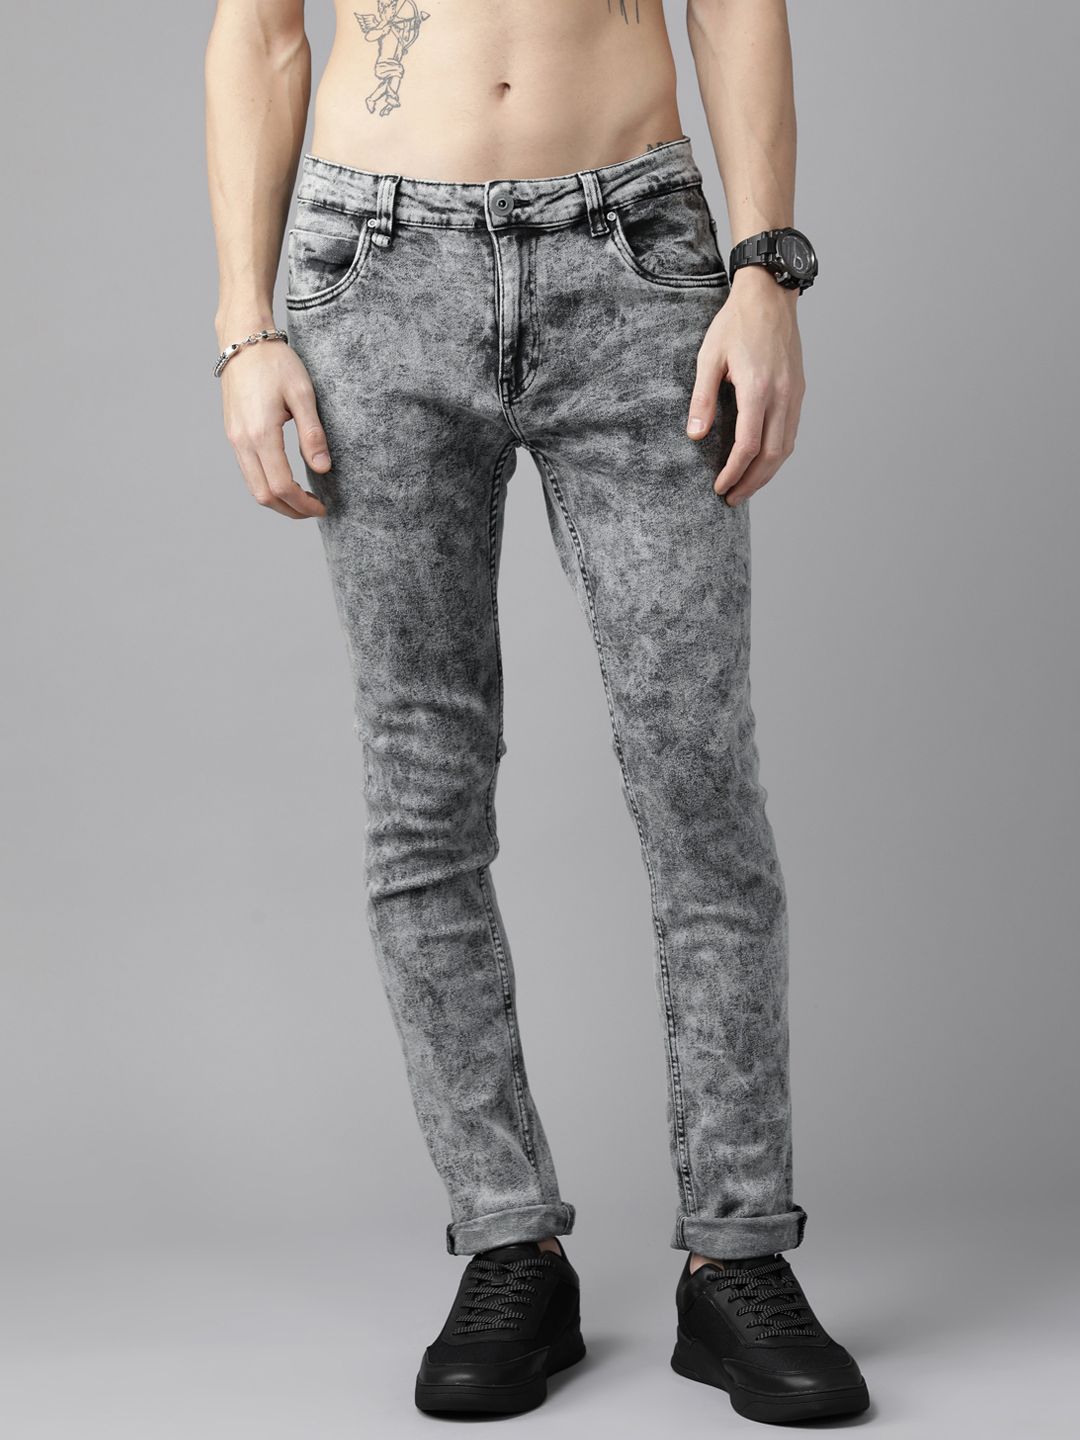 The Roadster Lifestyle Co. Men Skinny Fit Heavy Fade Jeans